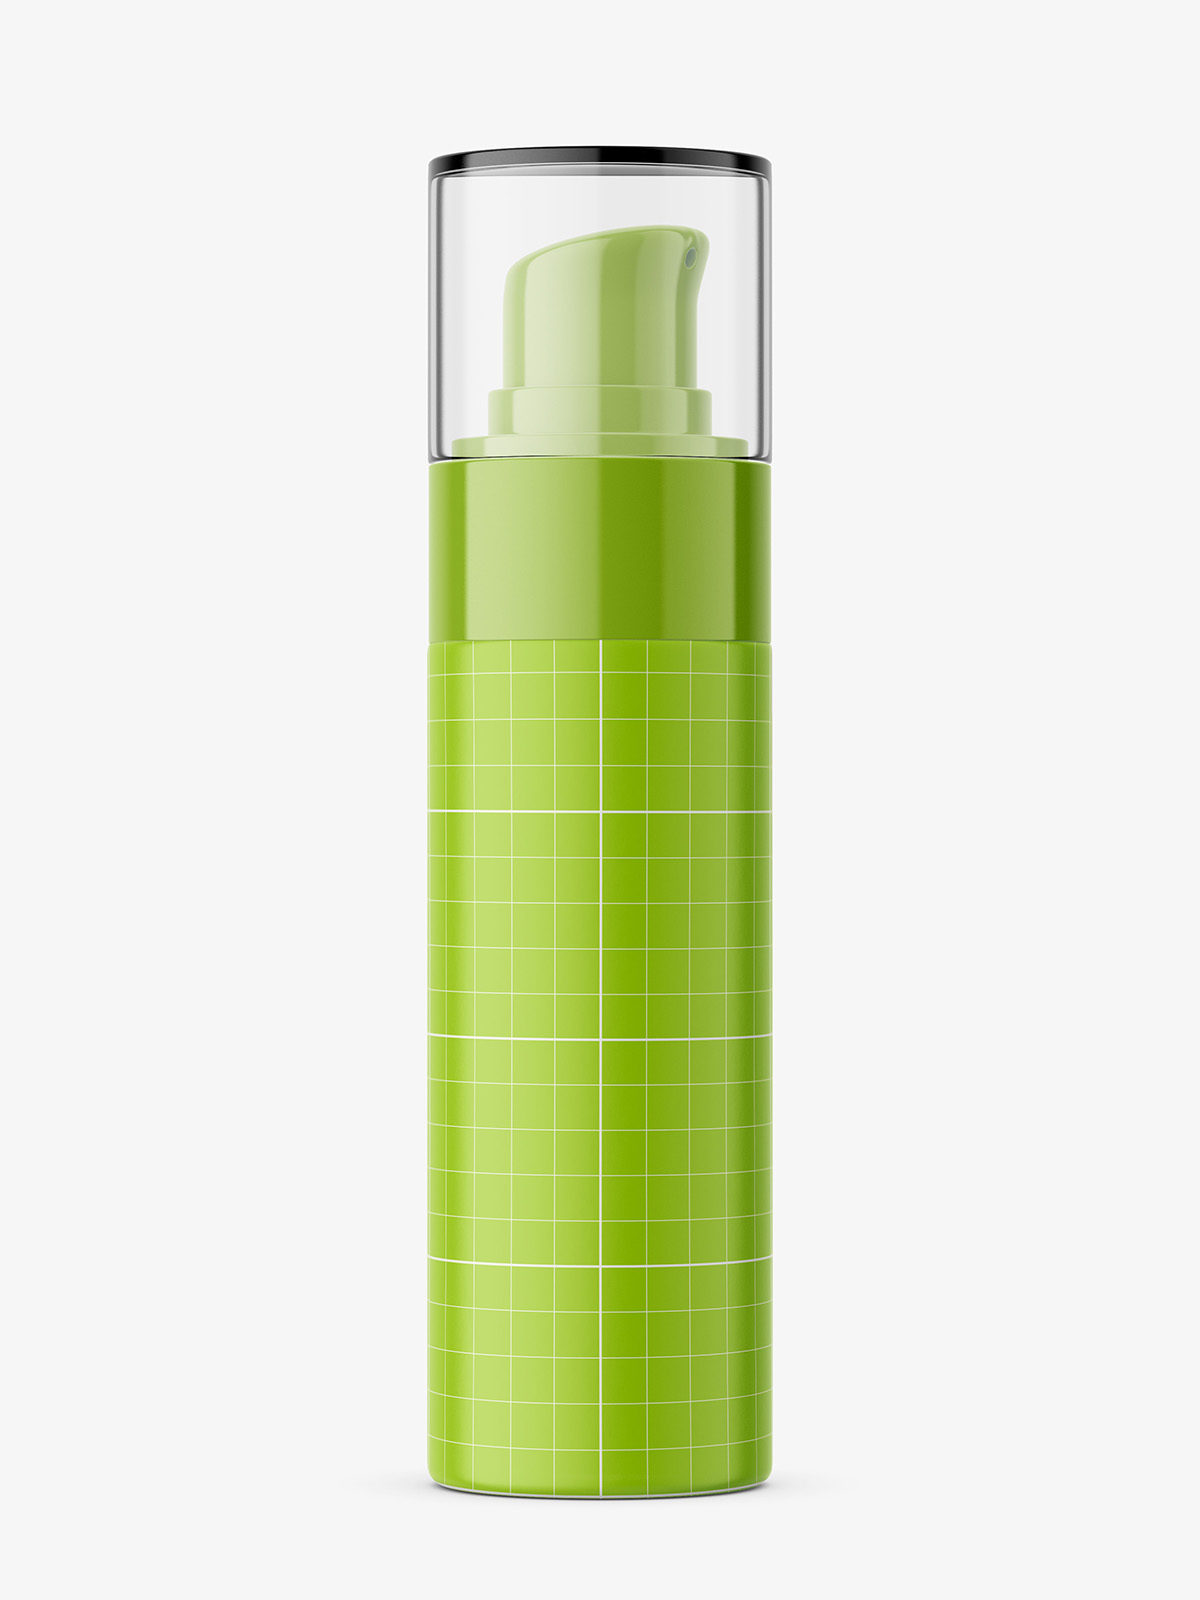 Download Glass airless bottle mockup - Smarty Mockups